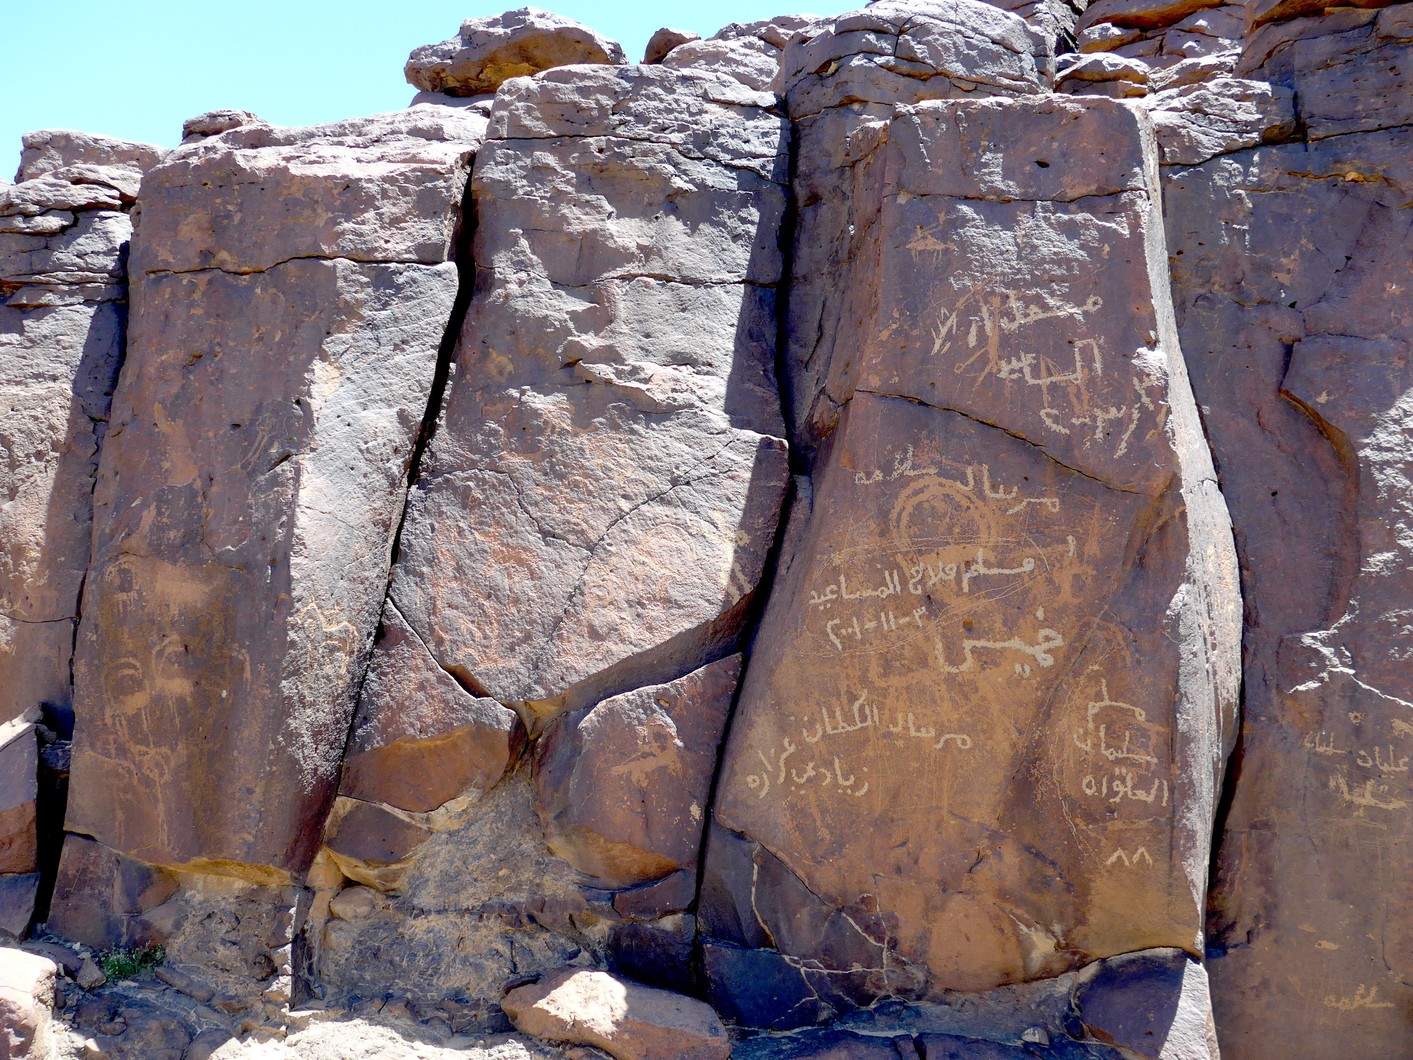 Cliff face containing rock art at Wadi Hassan. On the right column, notice the modern Arabic writing that covers the much earlier drawing of an ibex. Photo by C.D. Allen.